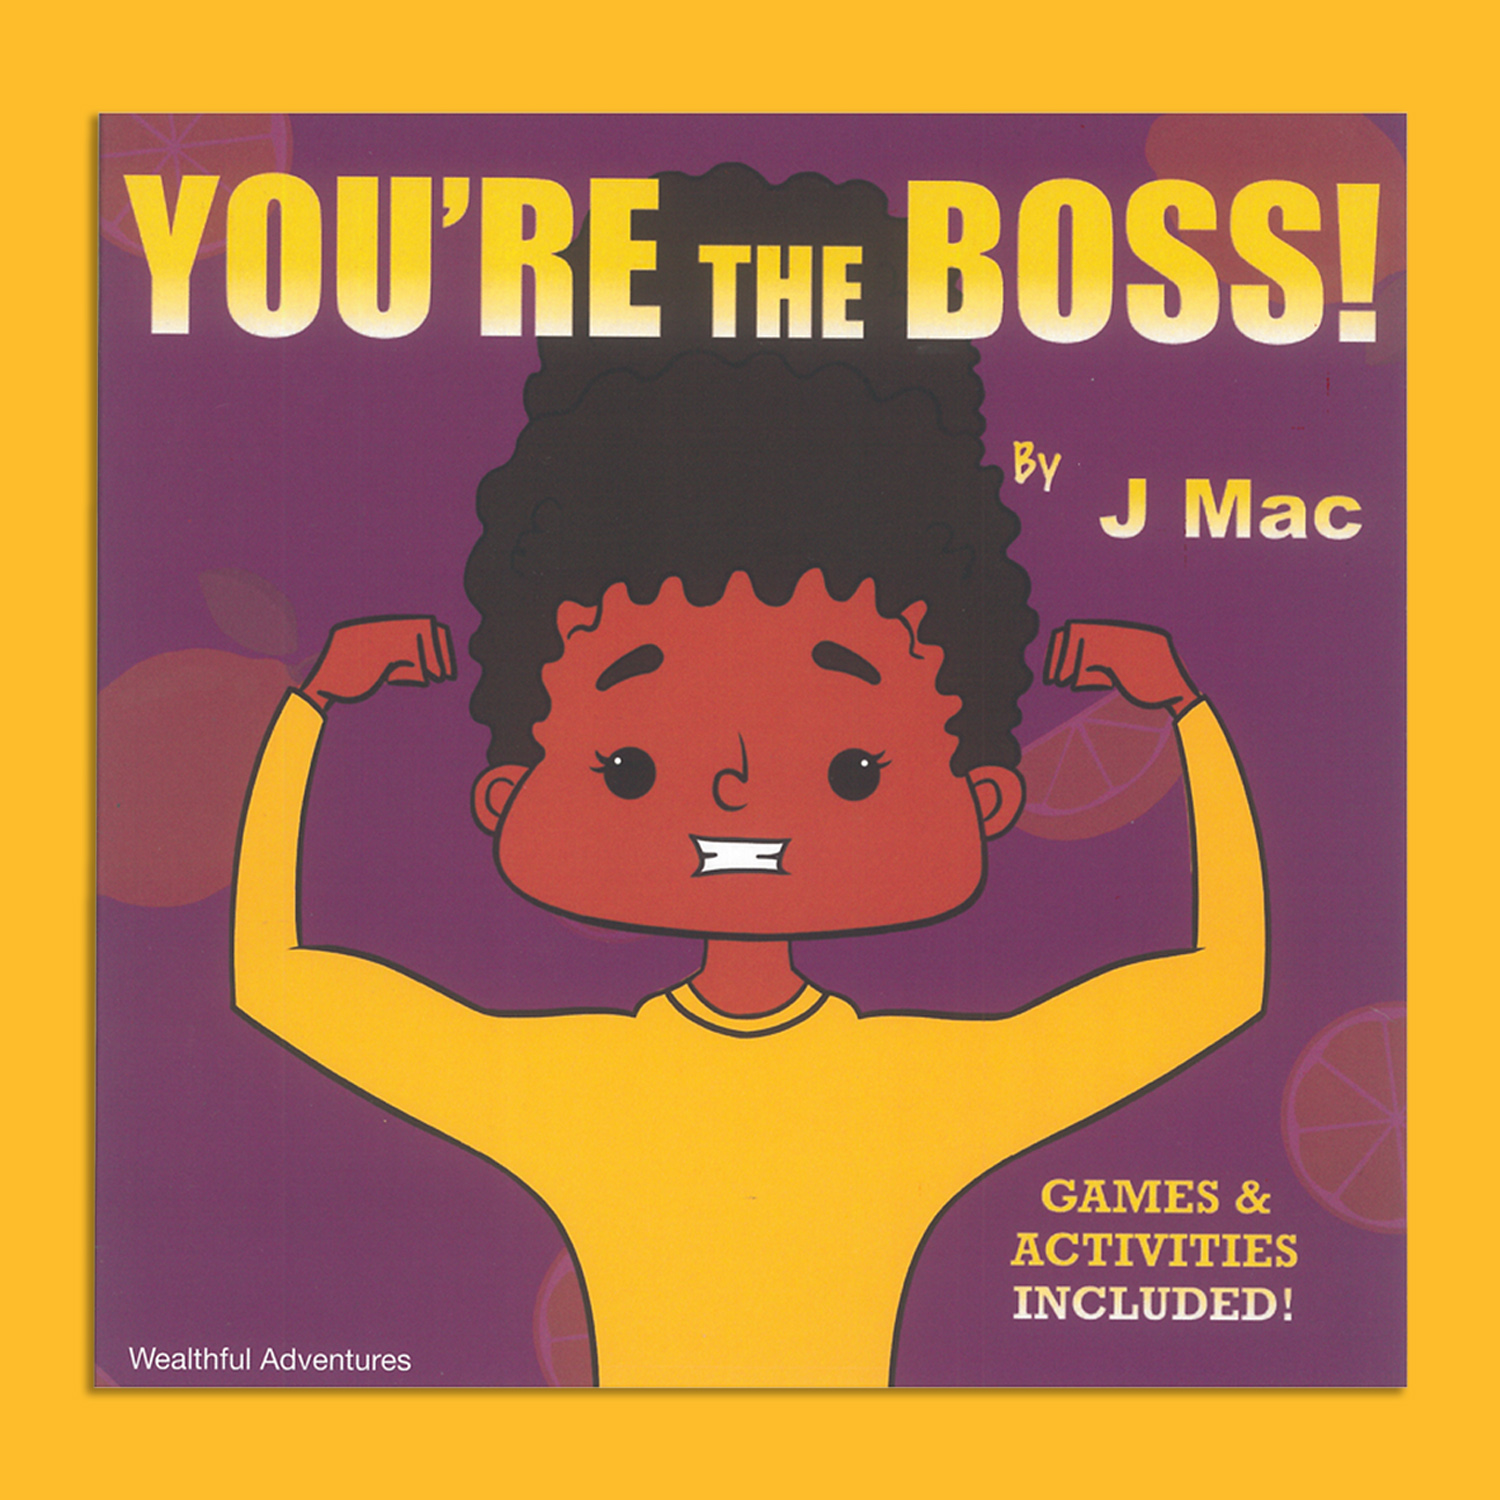 YOU'RE THE BOSS! - Shop at Matter